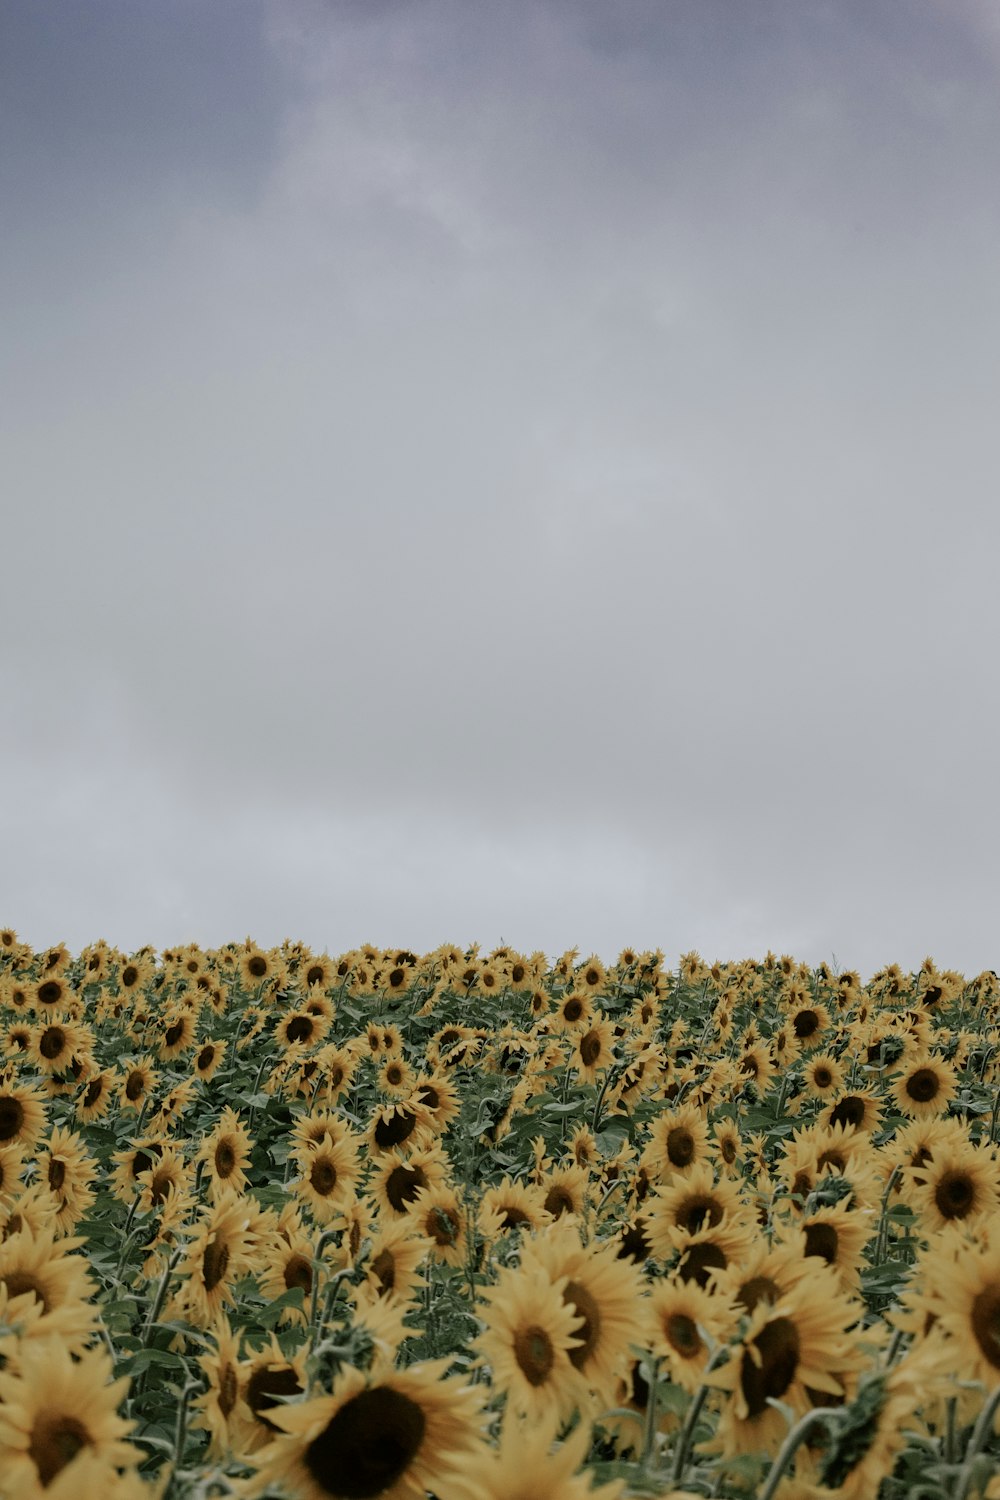 a large field of sunflowers under a cloudy sky